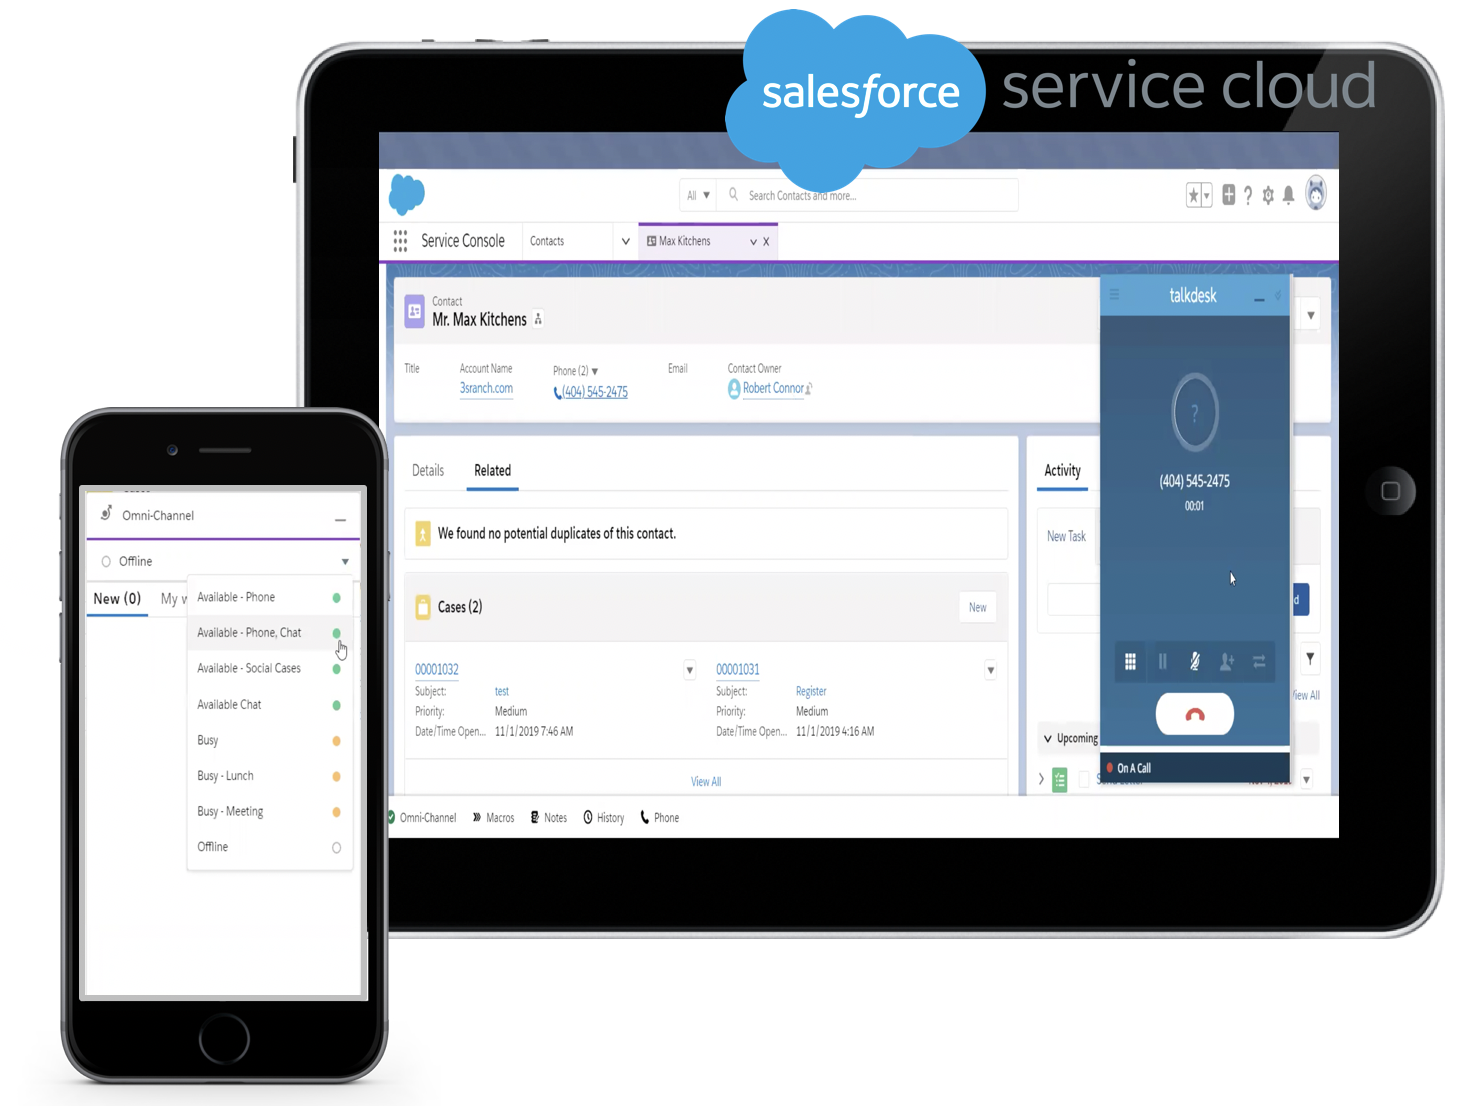 Salesforce Talkdesk integration and omni-channel routing